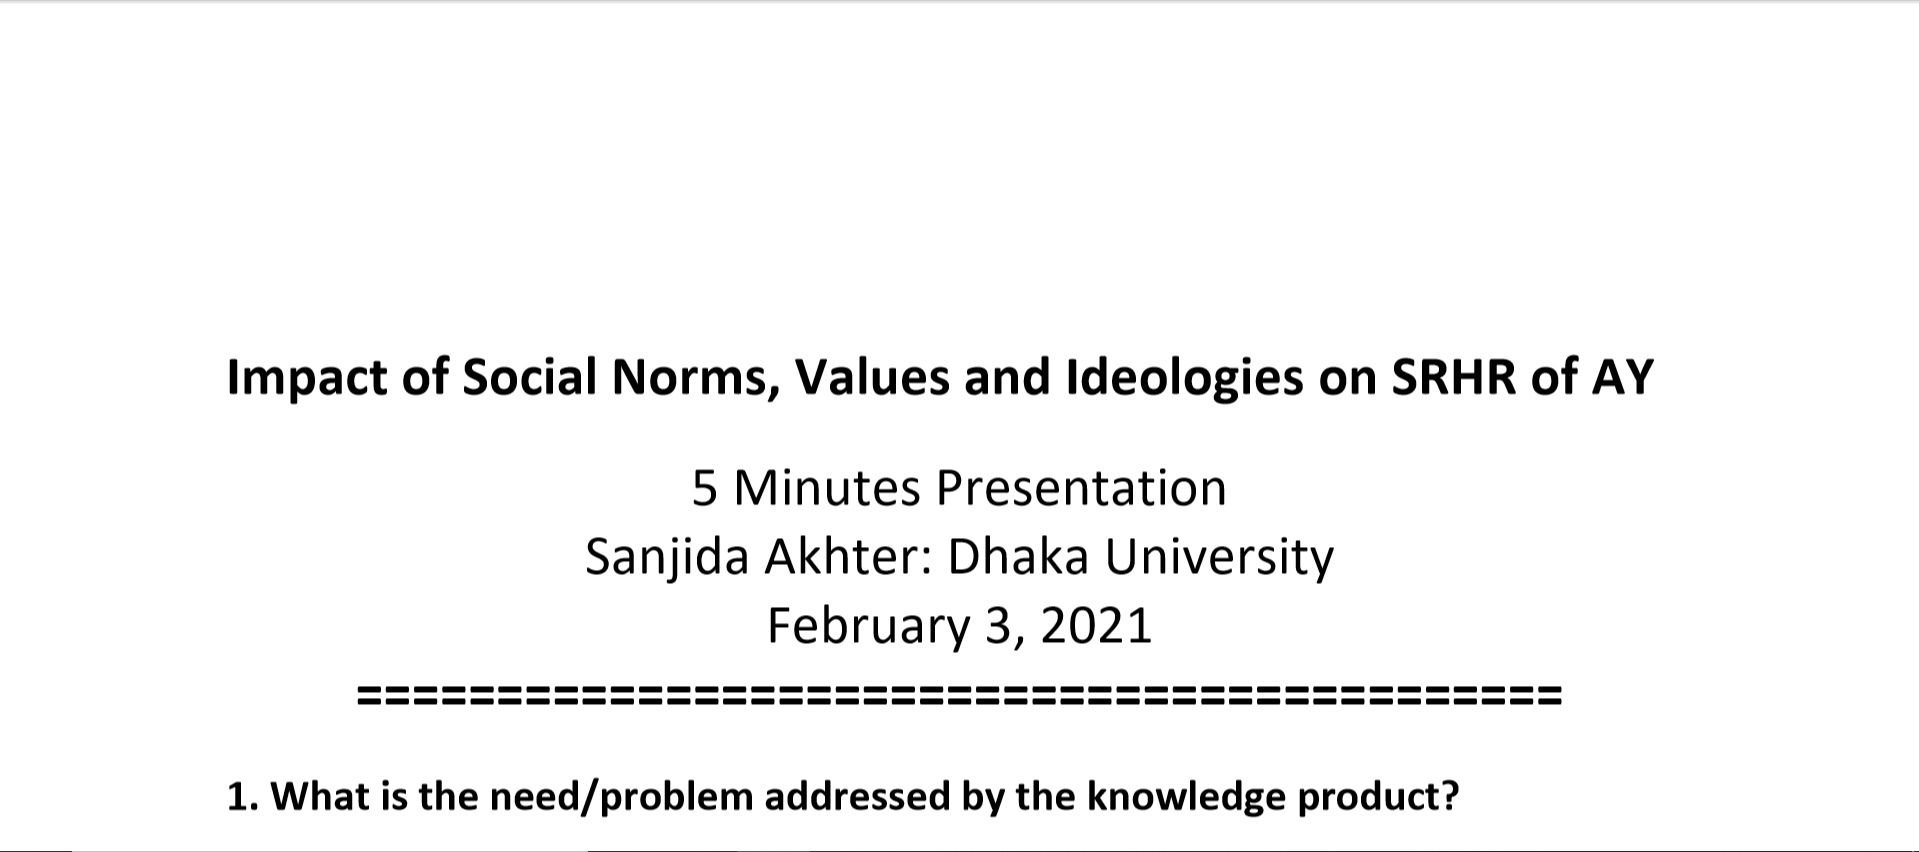 Impact of Social Norms, values and ideologies on SRHR